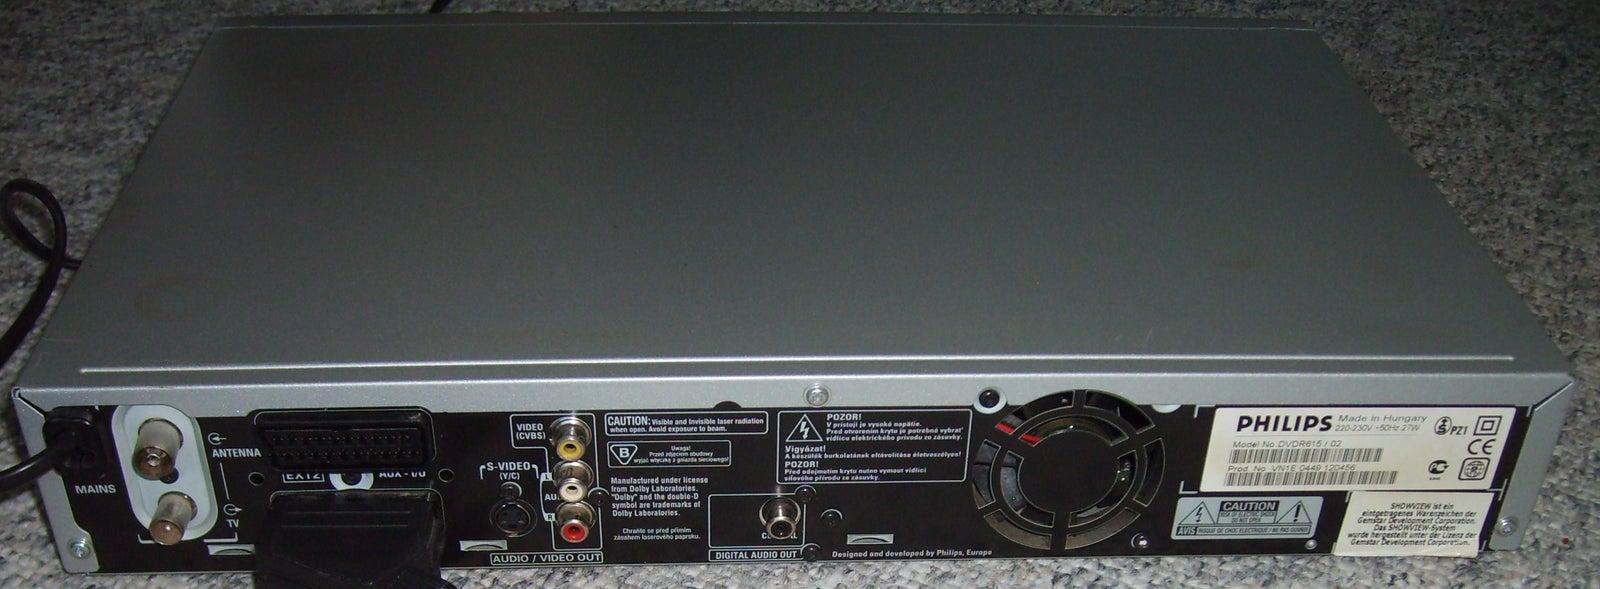 Philips, DVDR615, Dvd-optager